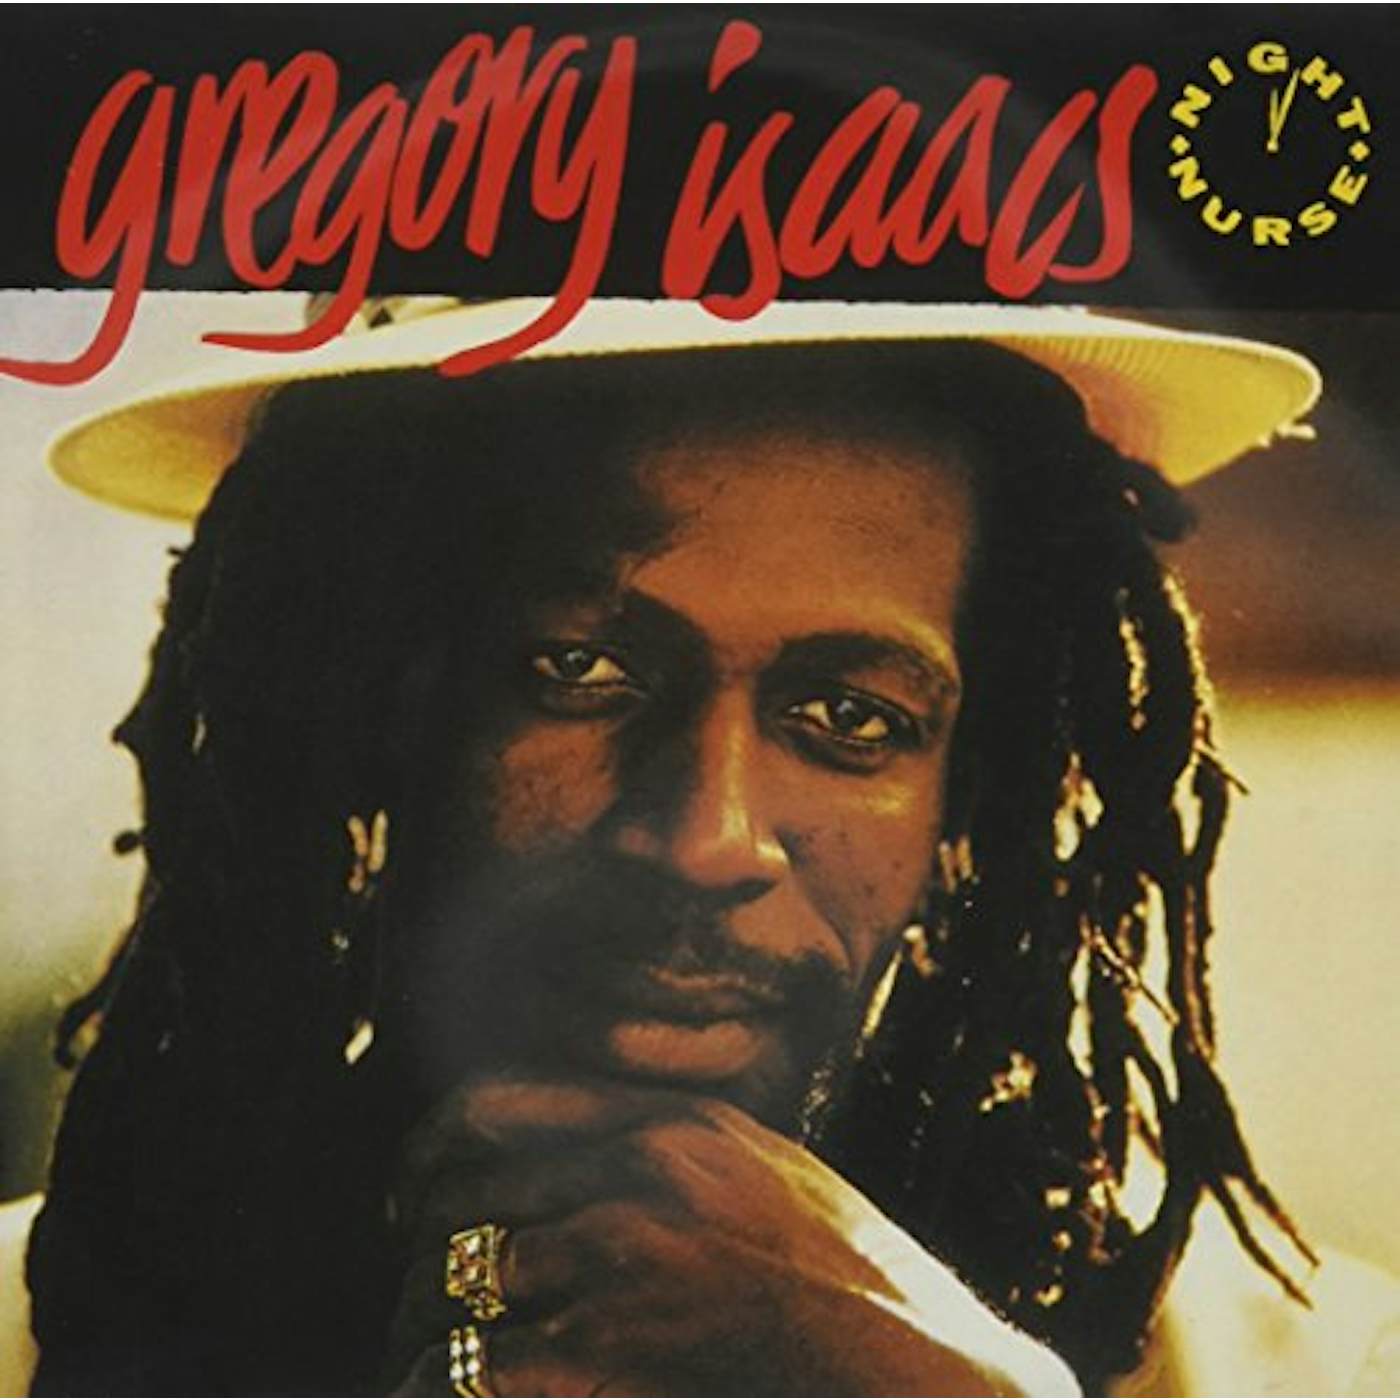 Gregory Isaacs MORE GREGORY + NIGHT NURSE CD